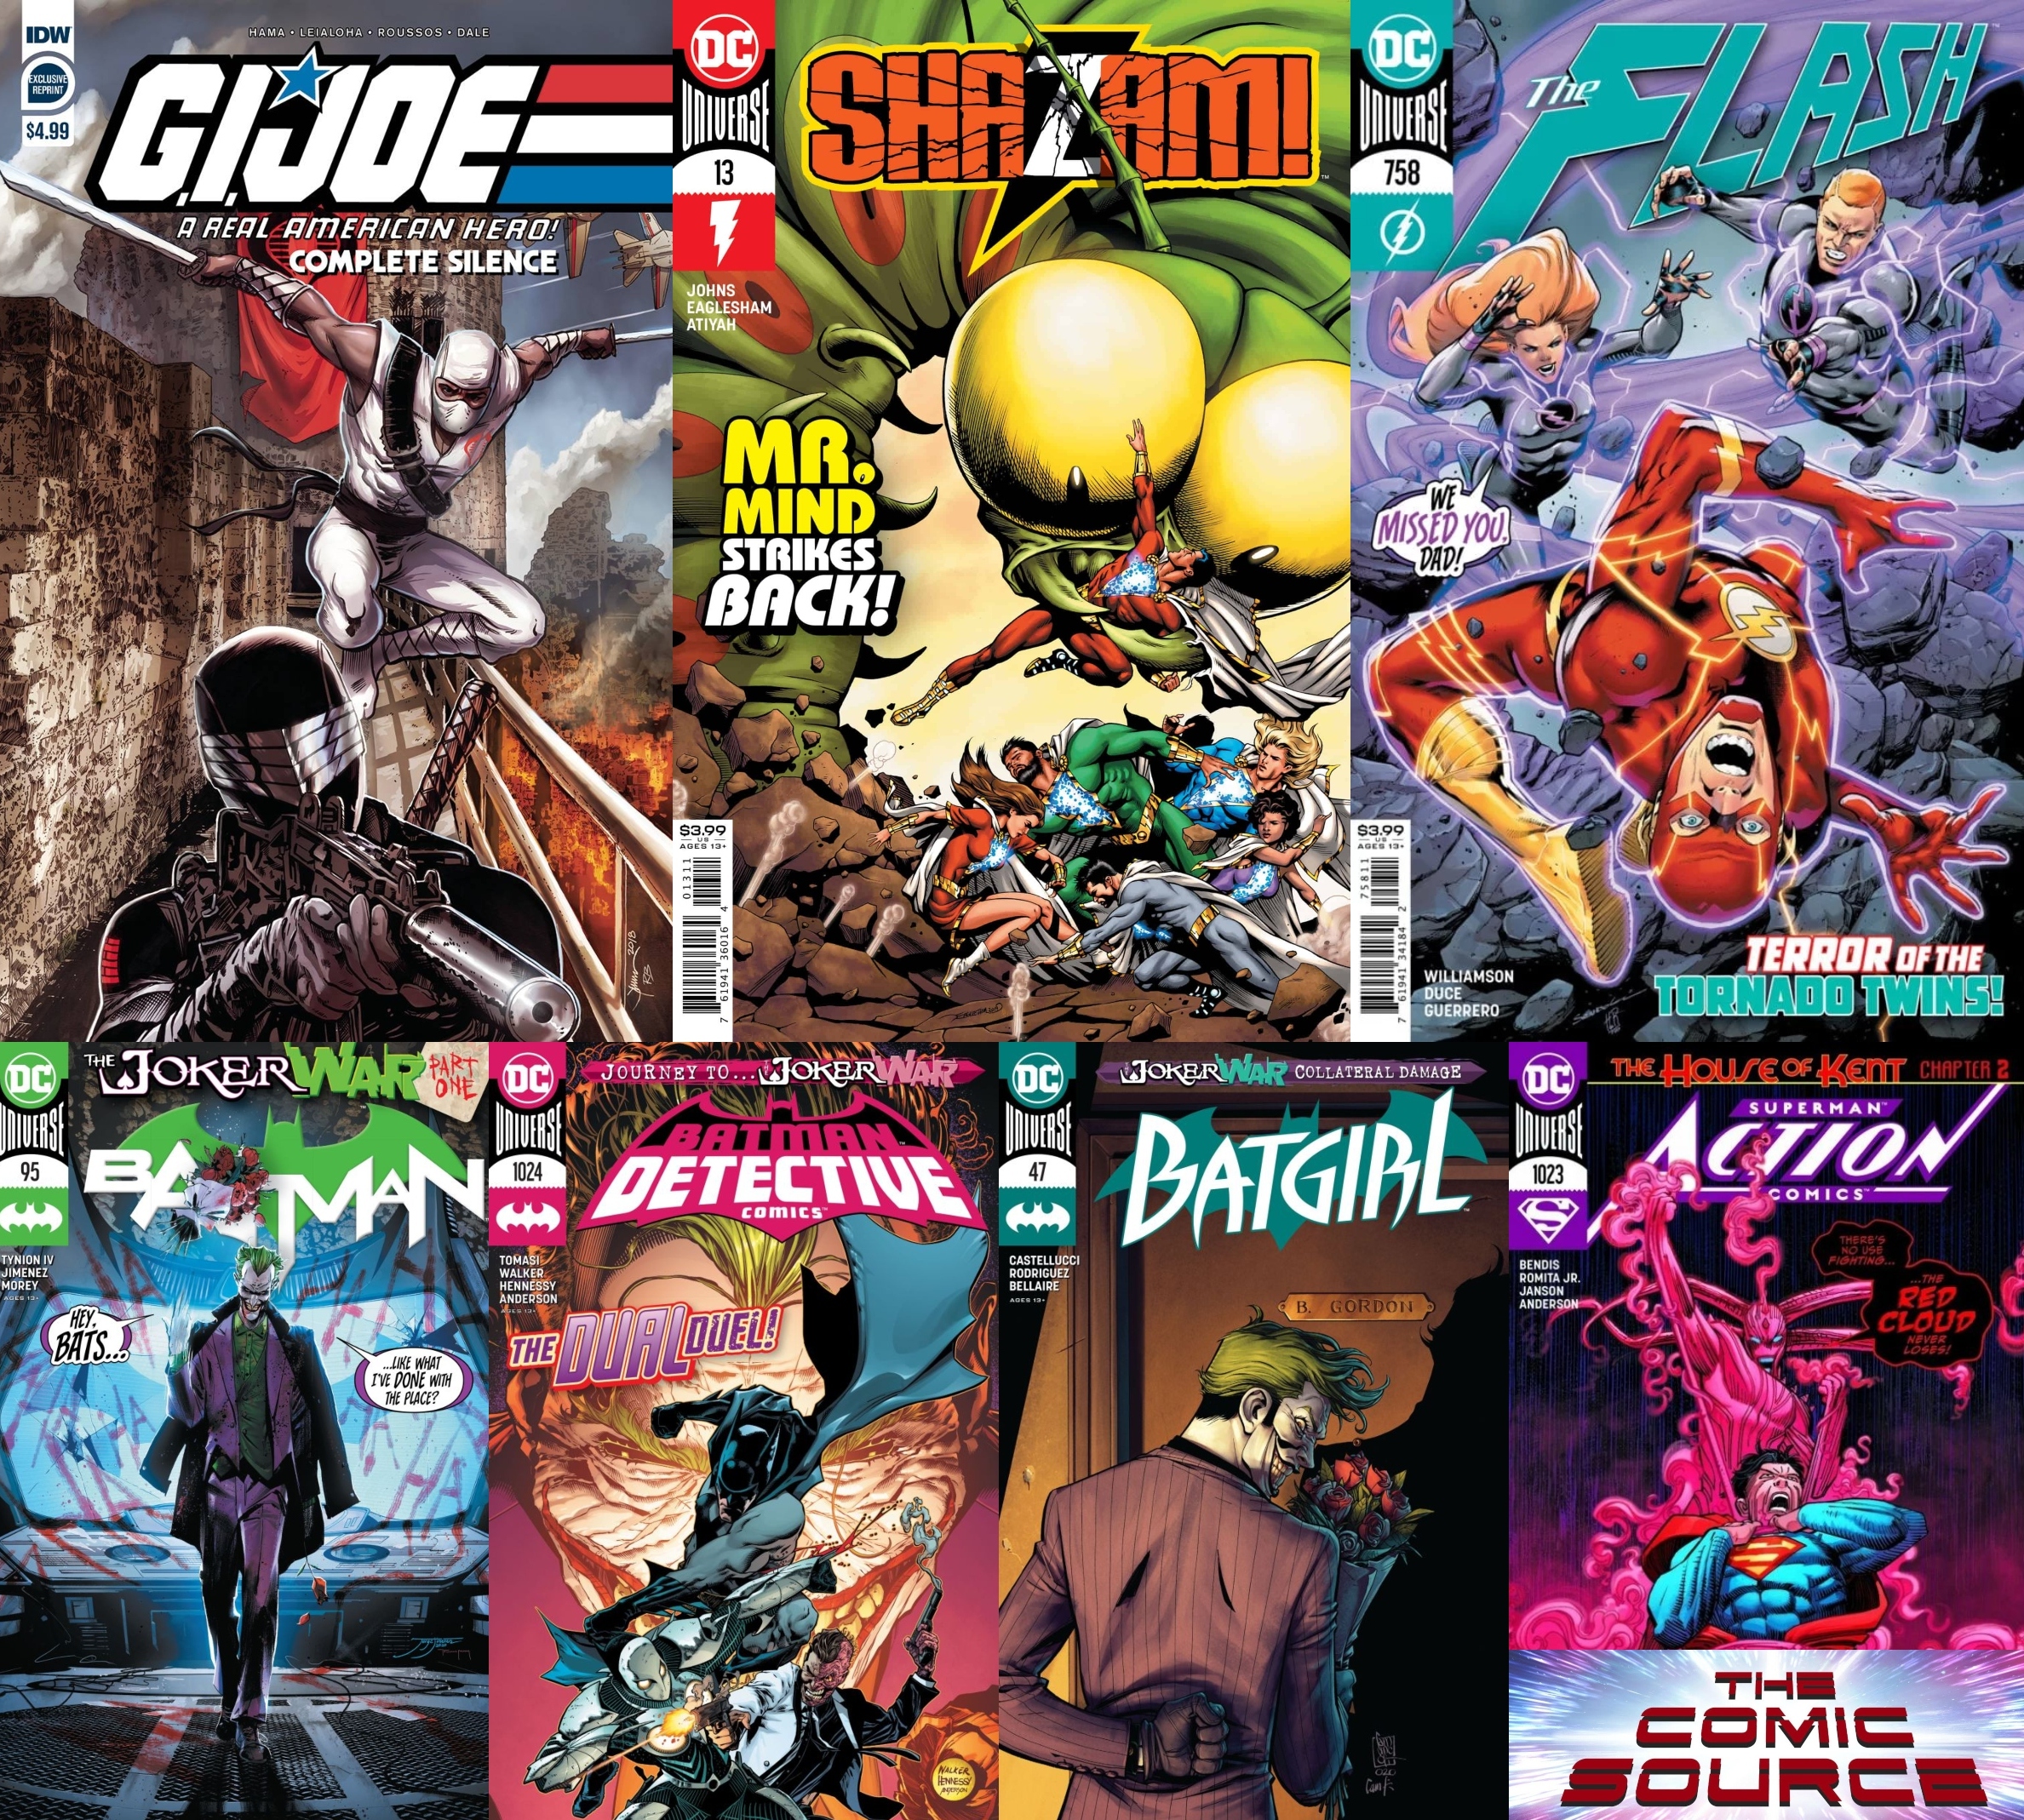 New Comic Wednesday July 22, 2020: The Comic Source Podcast